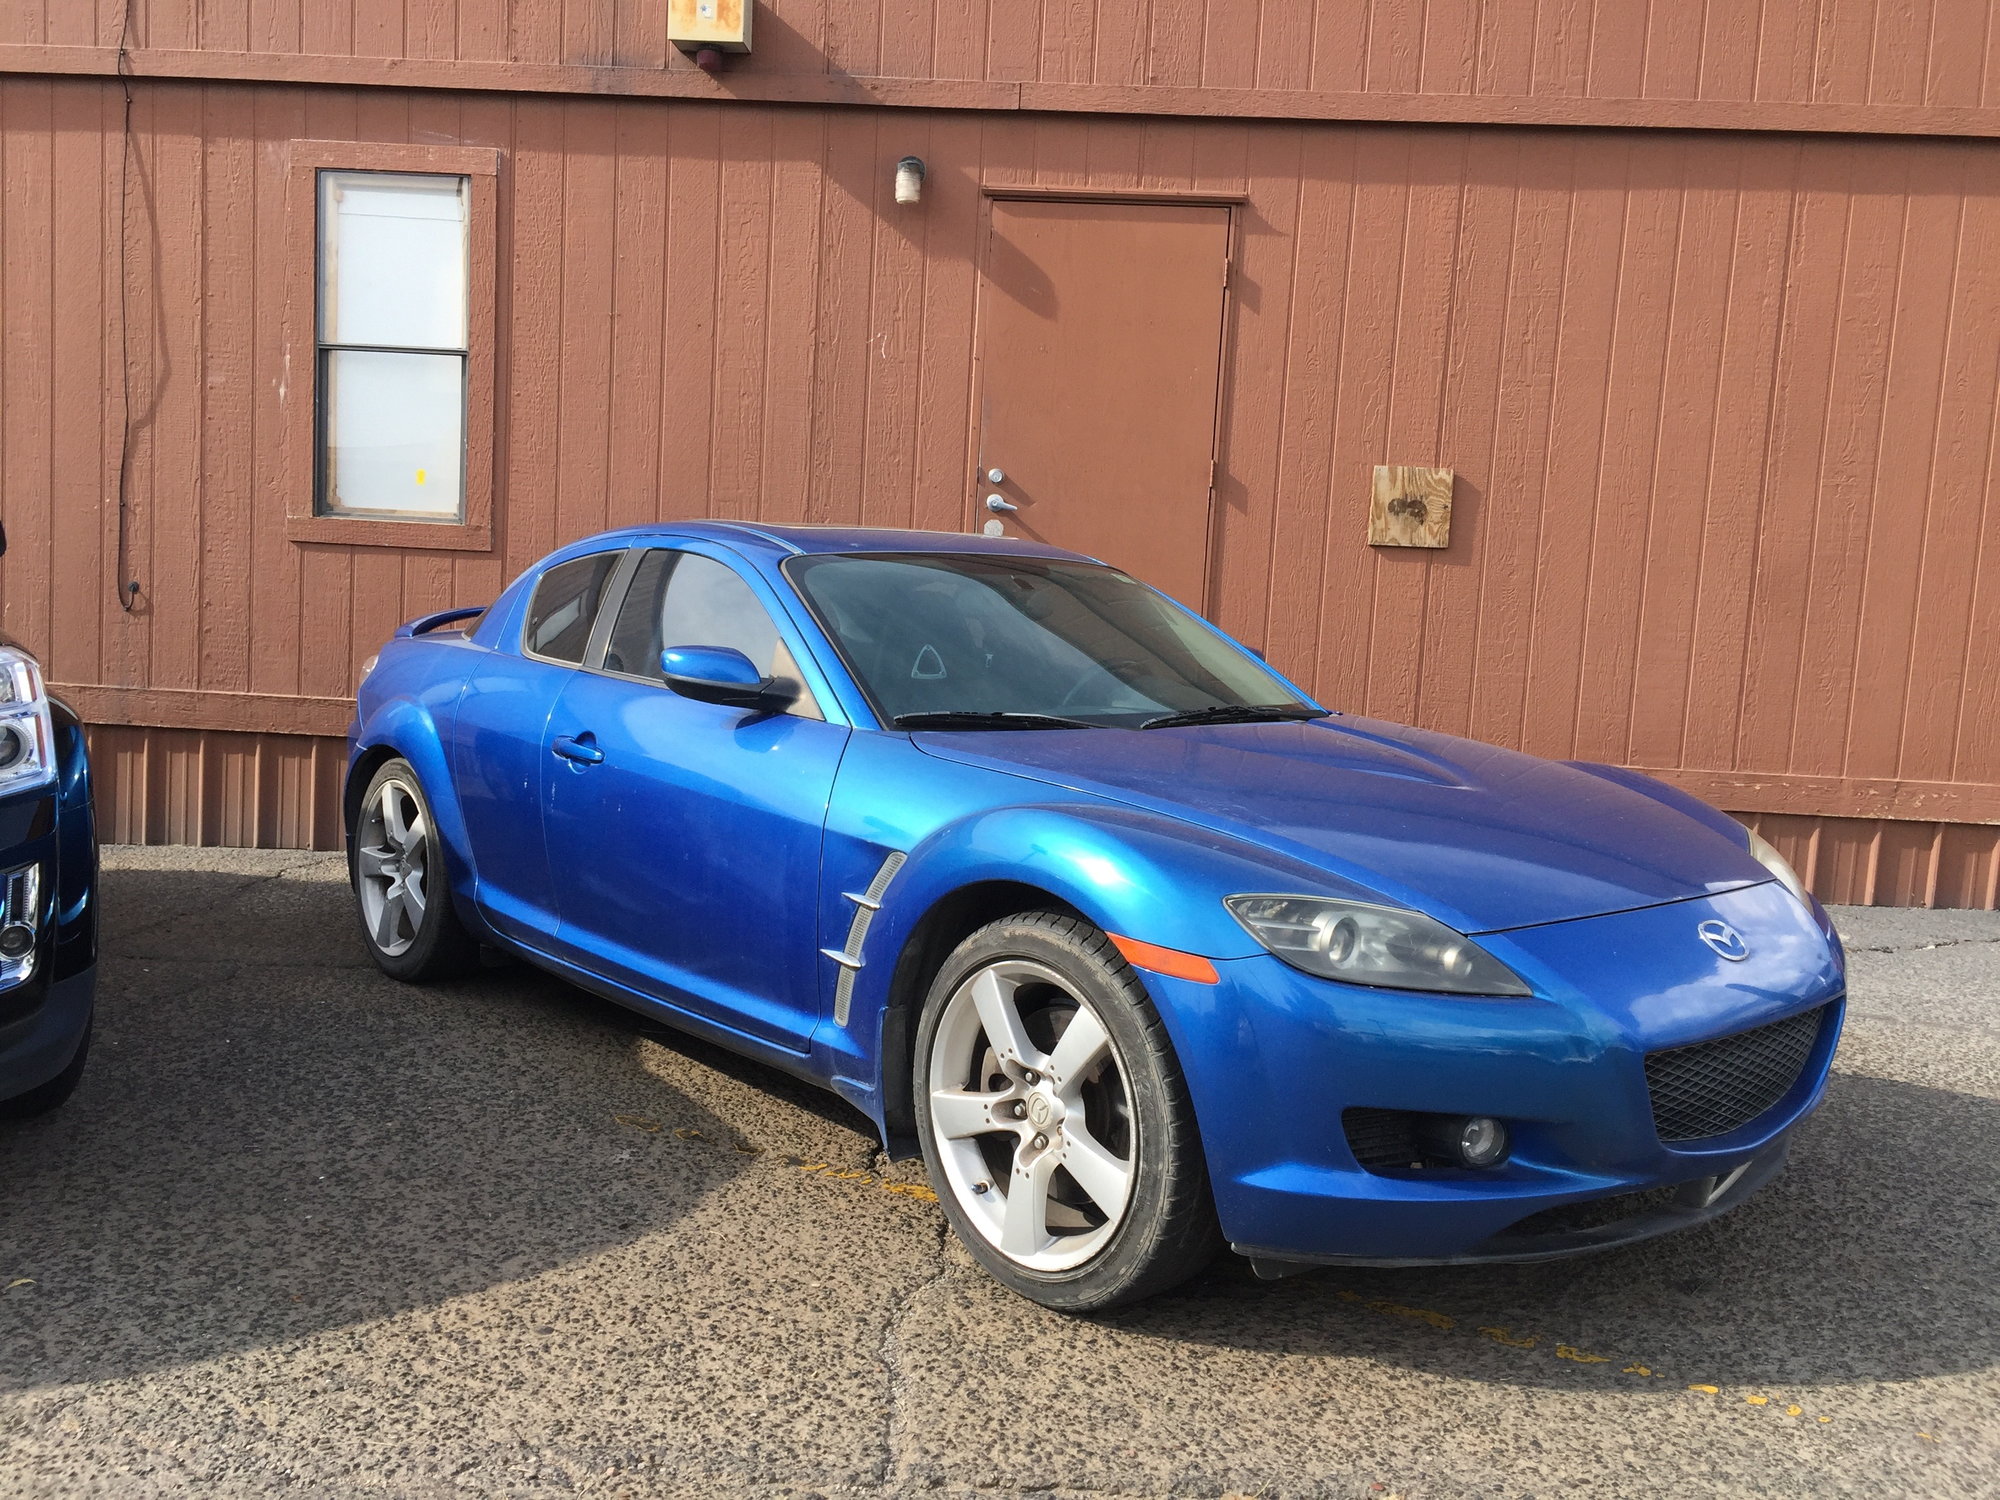 What To Look For When Buying An Rx8